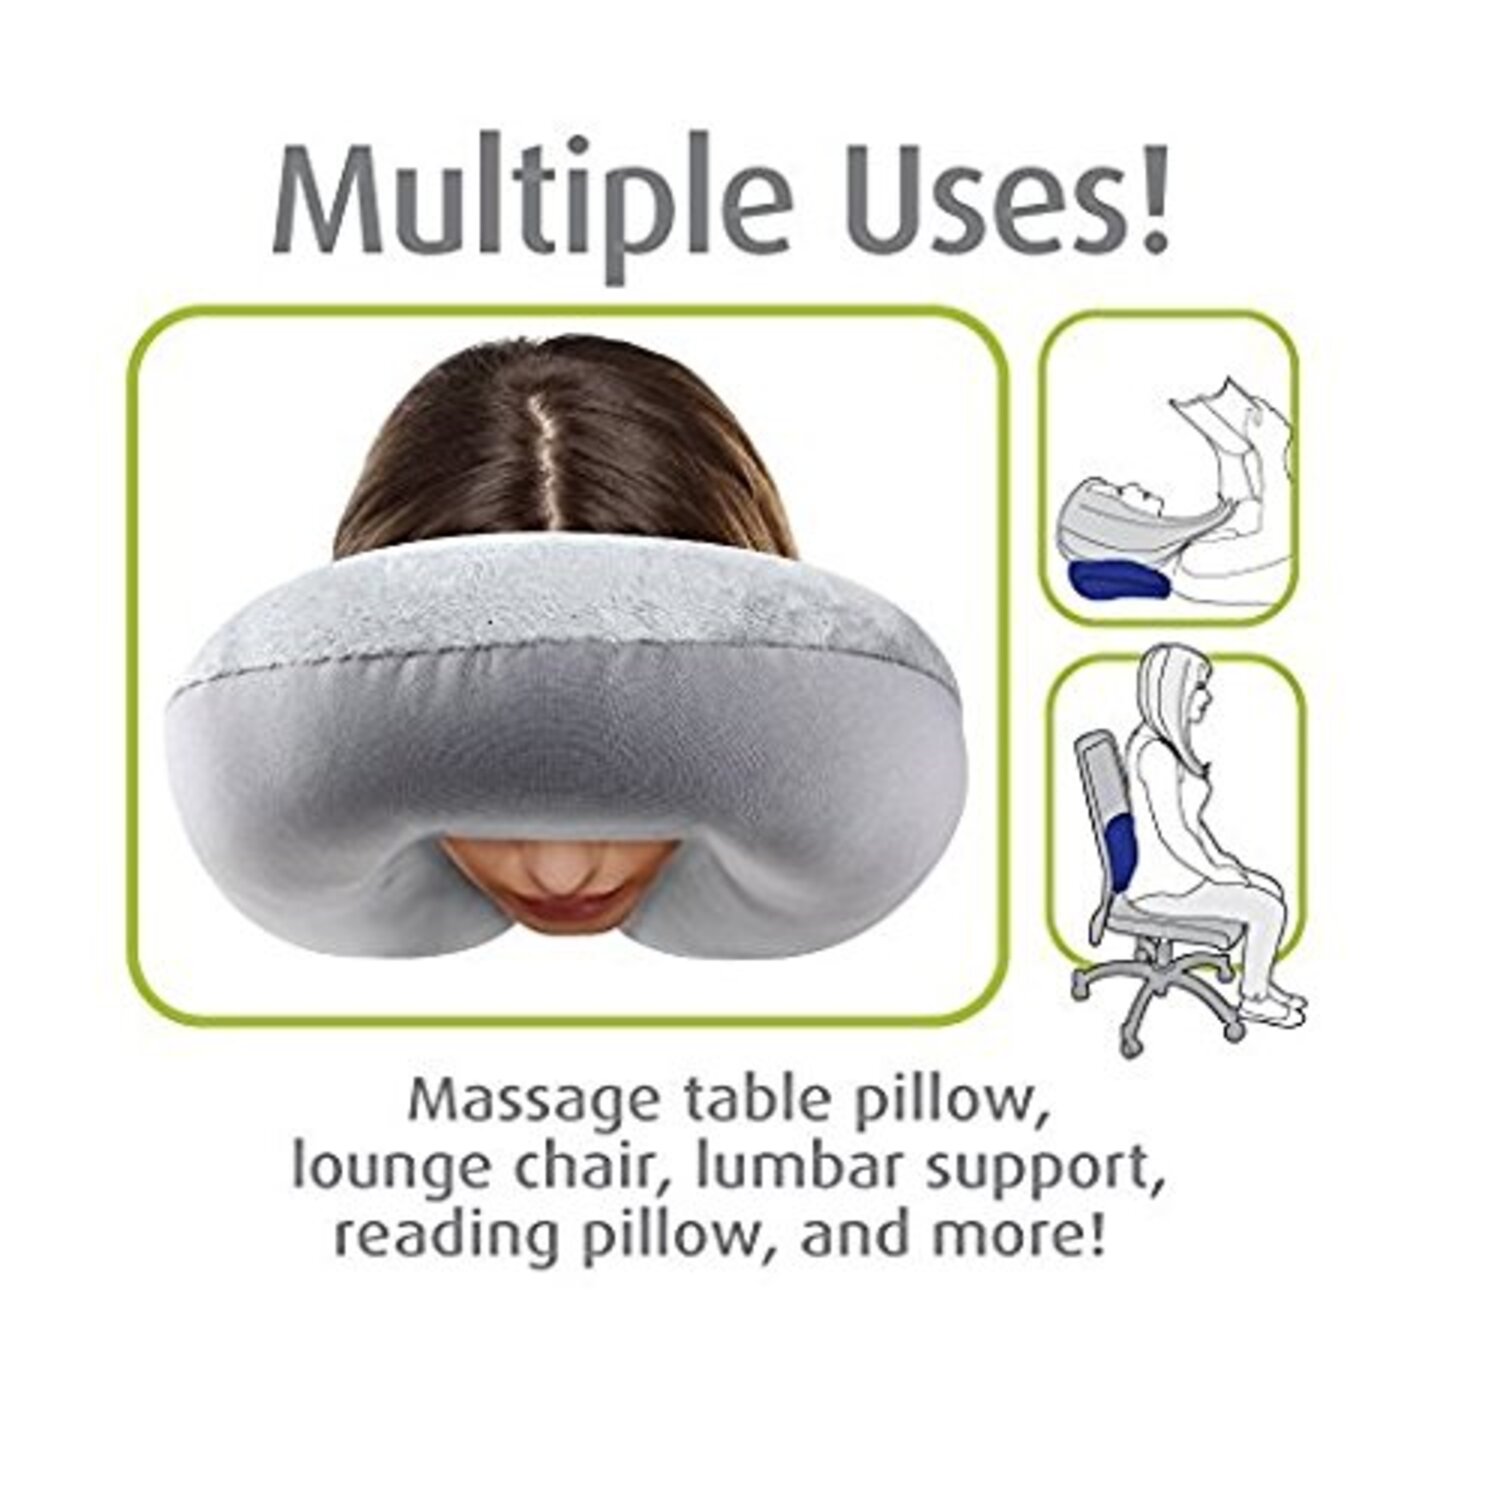 Buy Neck Rest For Plane Travel Online At Lowest Prices